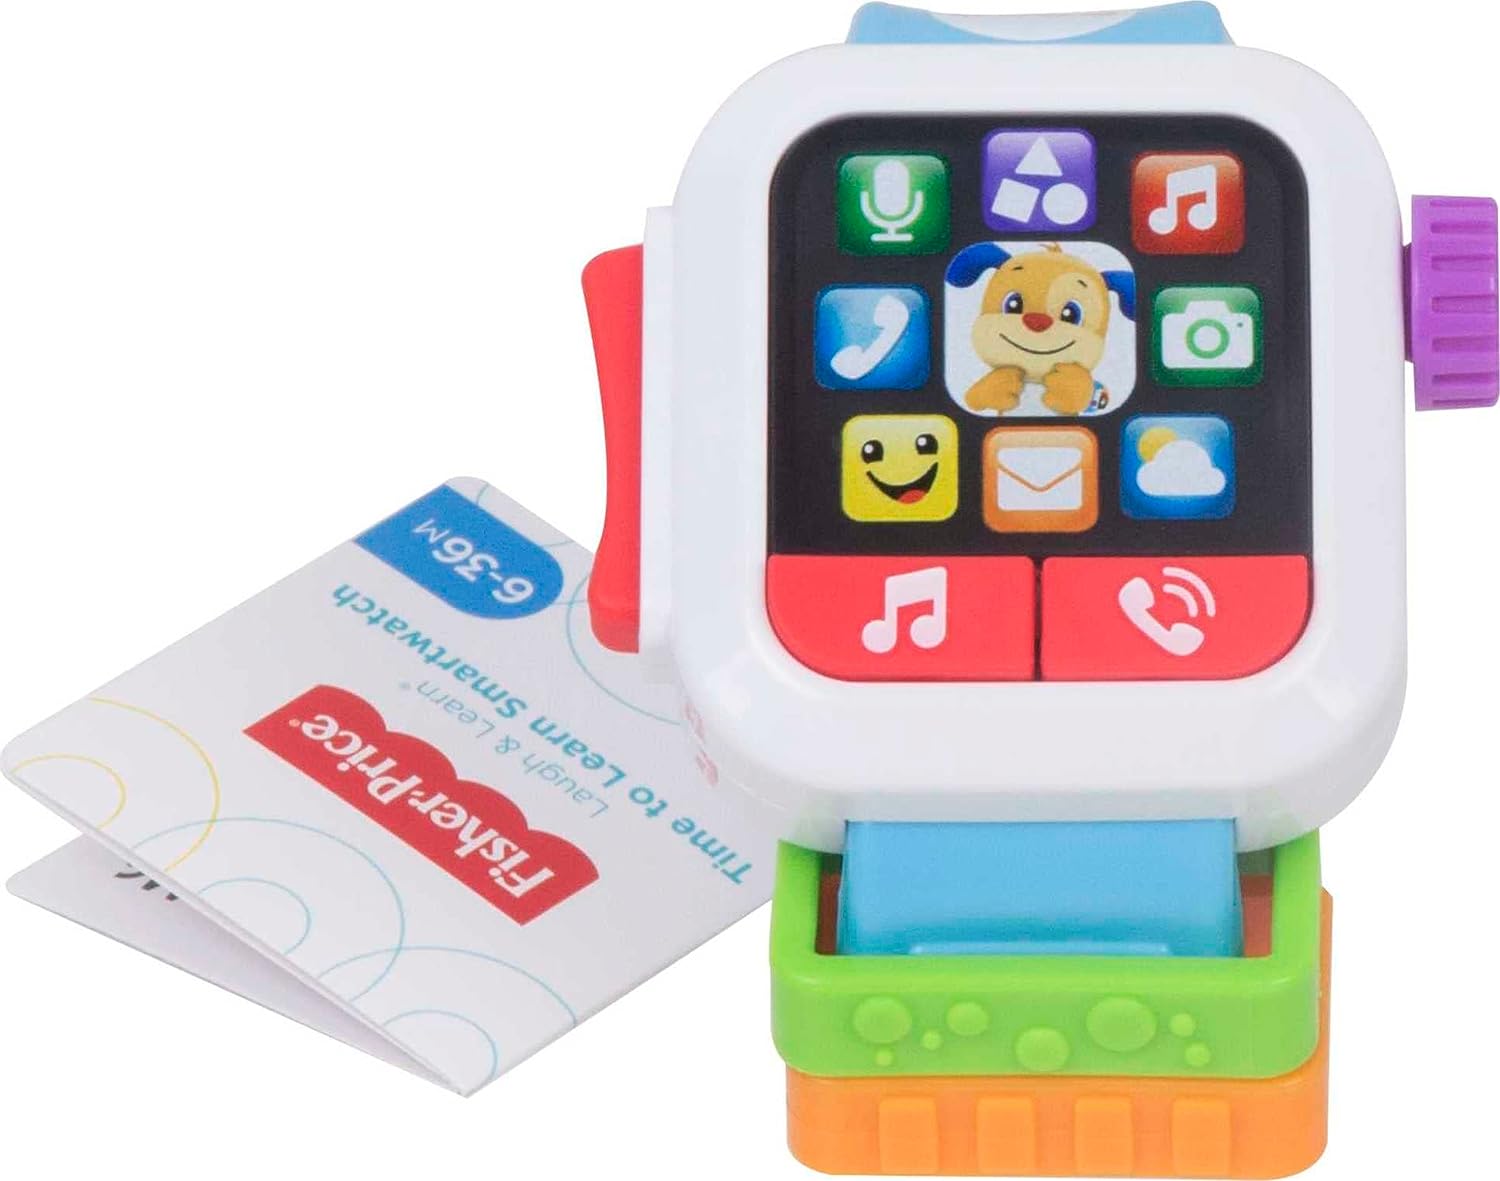 Fisher-Price Laugh & Learn Baby To Toddler Toy Time To Learn Smartwatch With Lights & Music For Pretend Play Ages 6+ Months